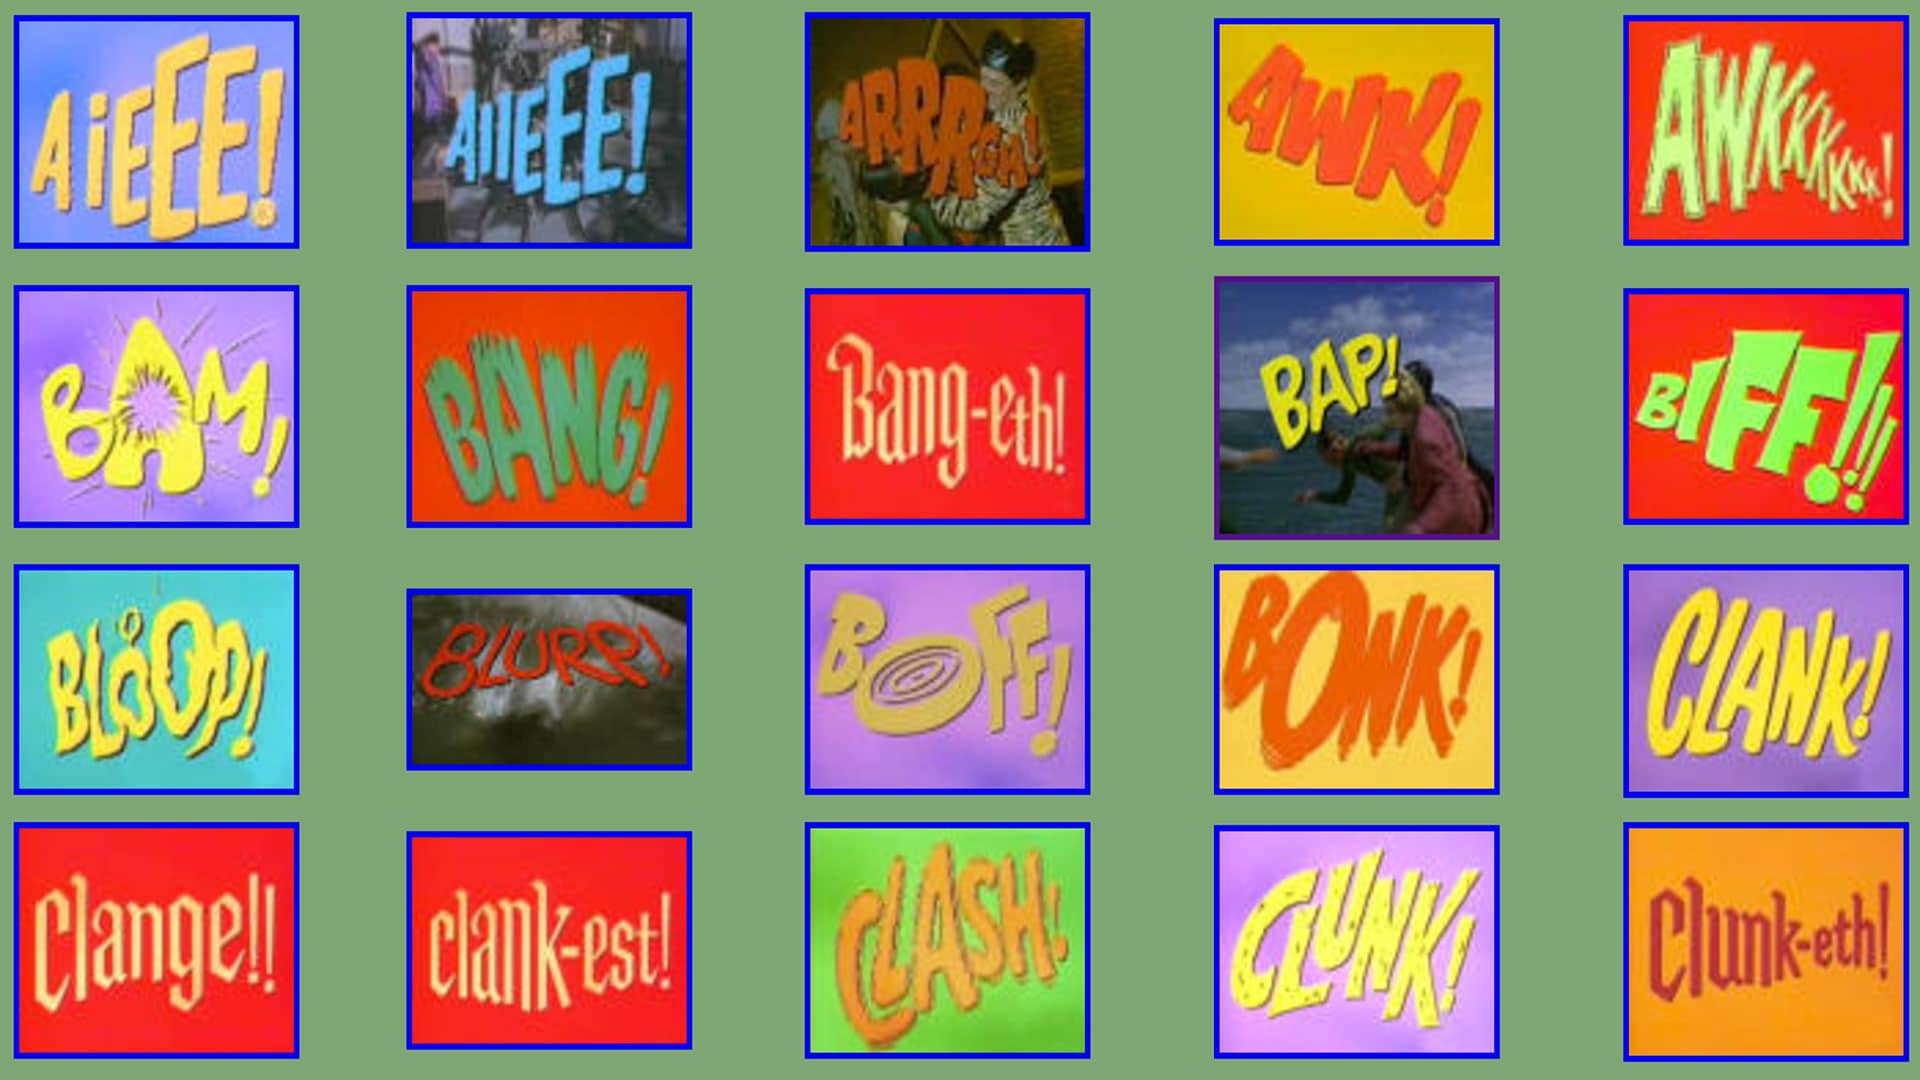 Boff! Bonk! Pow! - The Story Behind The Cheesy Batman Fight Words From The 1966 TV Series